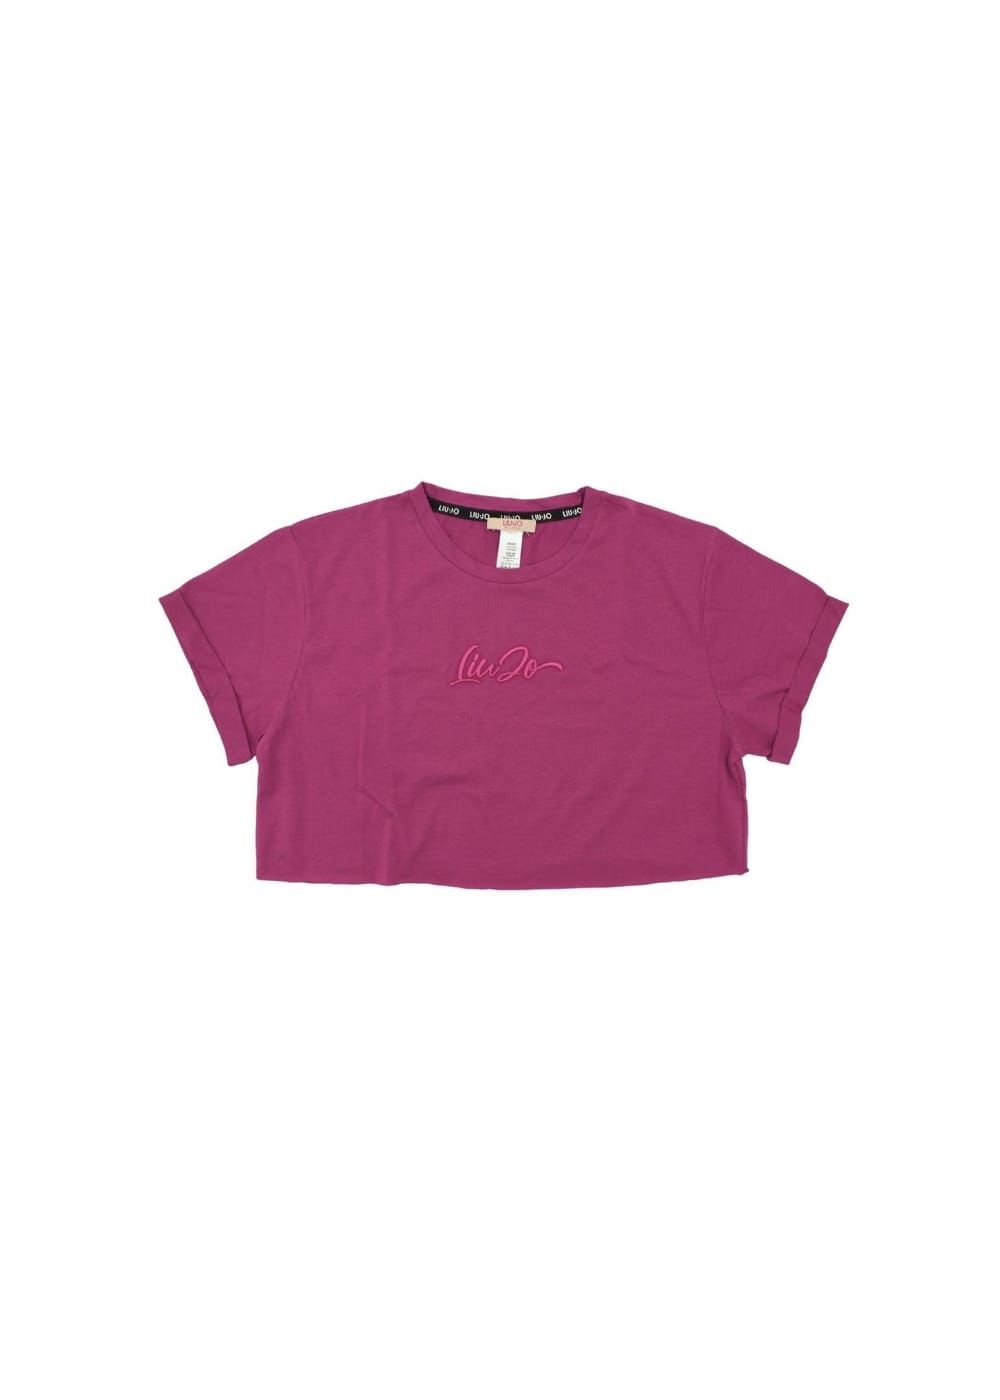 Featured image for “Liu Jo T-shirt cropped con logo”